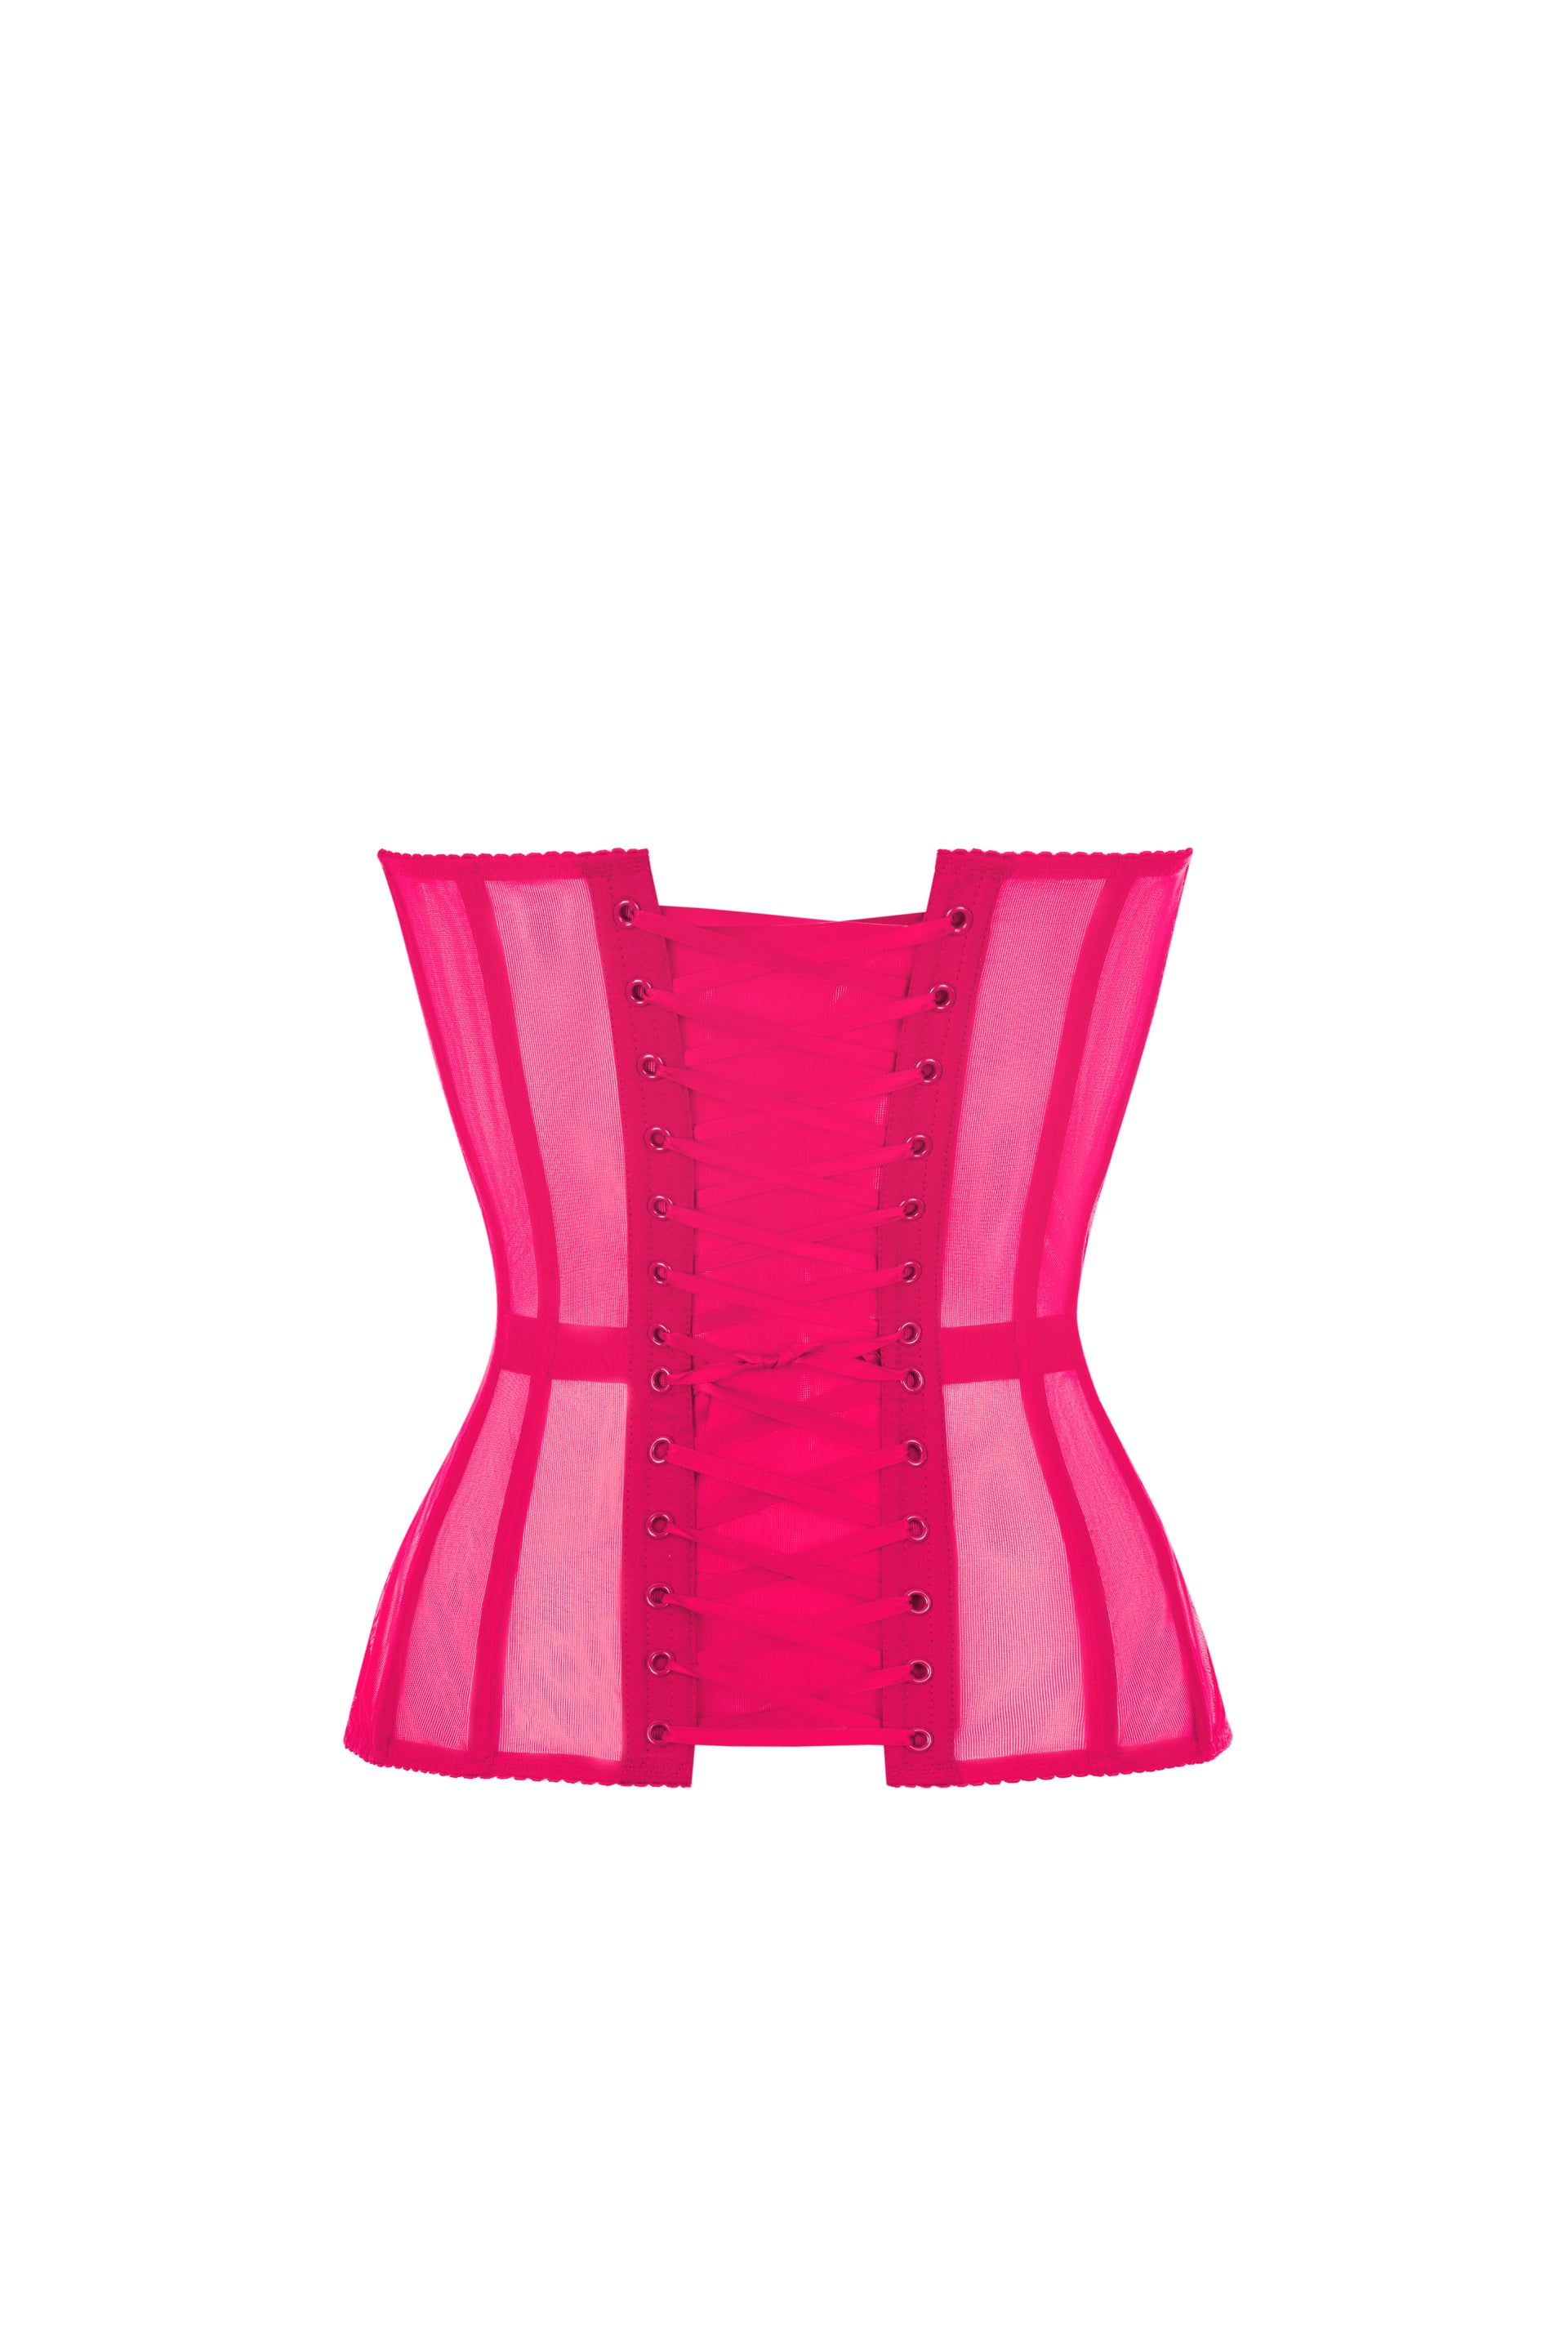 Hot pink corset with cups